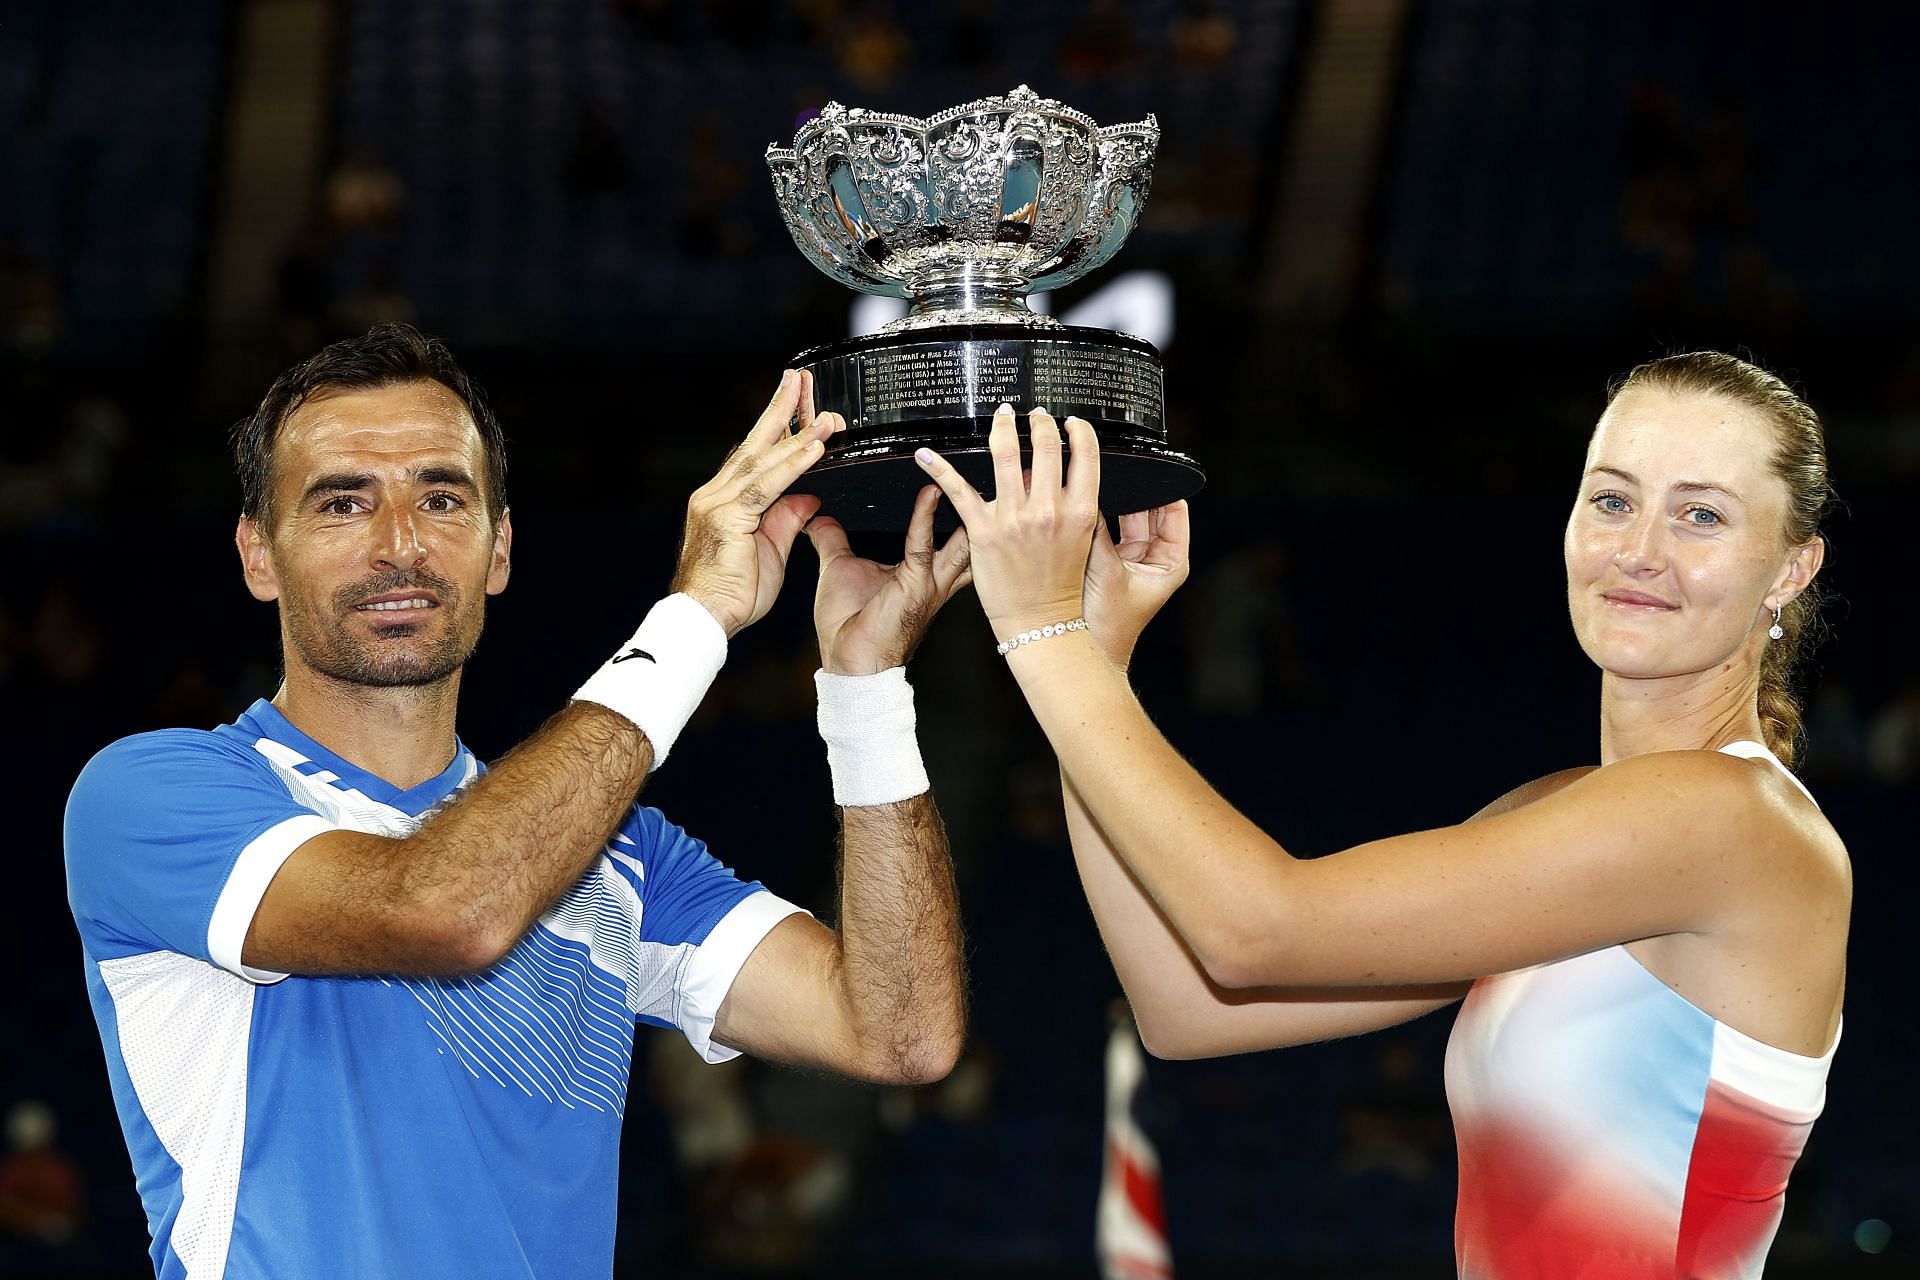 Ivan Dodig and Kristina Mladenovic won their first mixed doubles title as a team